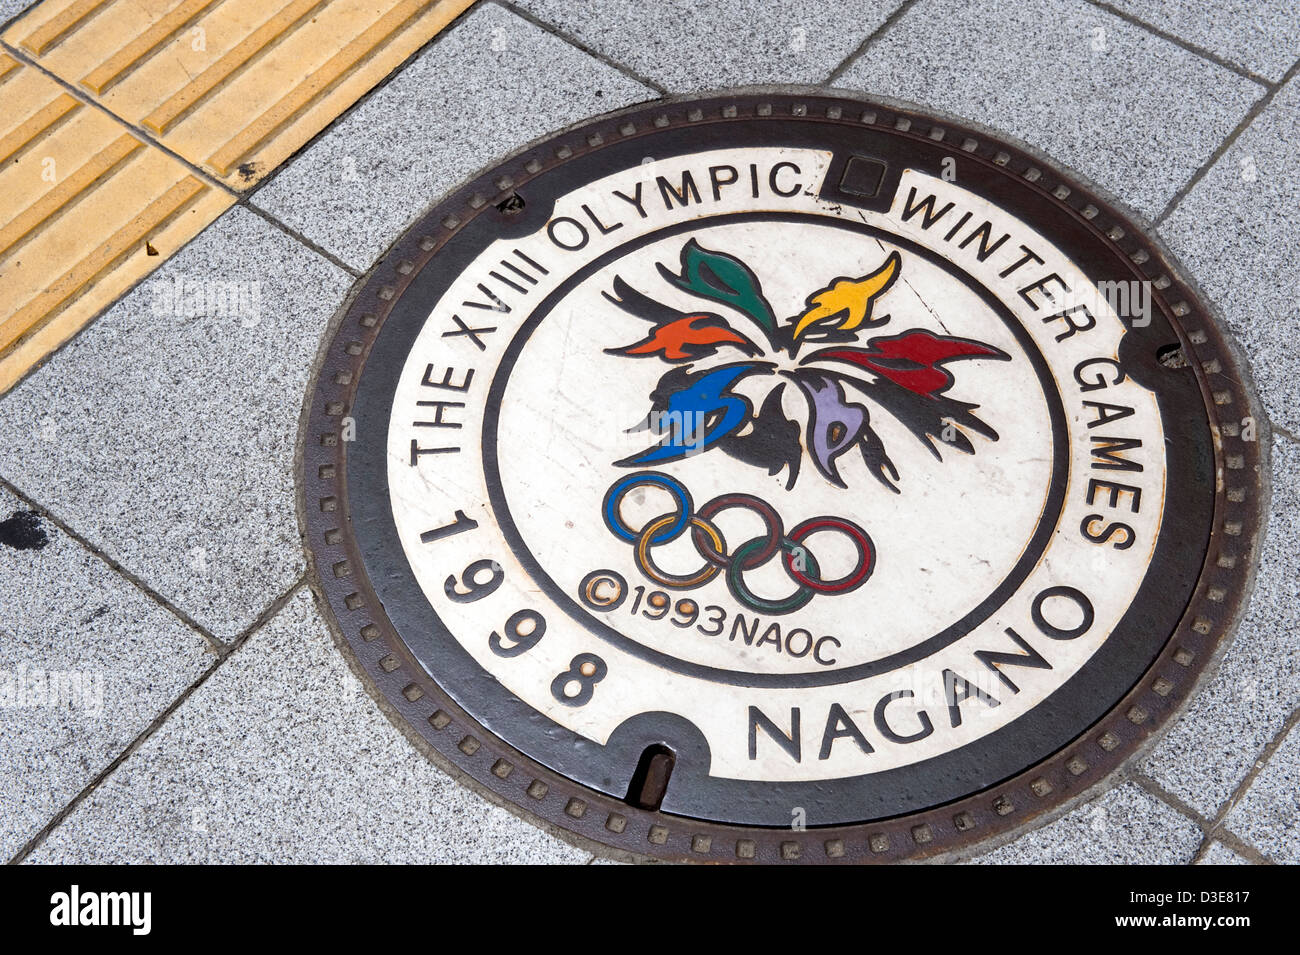 An artistic manhole cover celebrating the 18th Winter Olympic Games of 1998 in Nagano City, Japan. Stock Photo